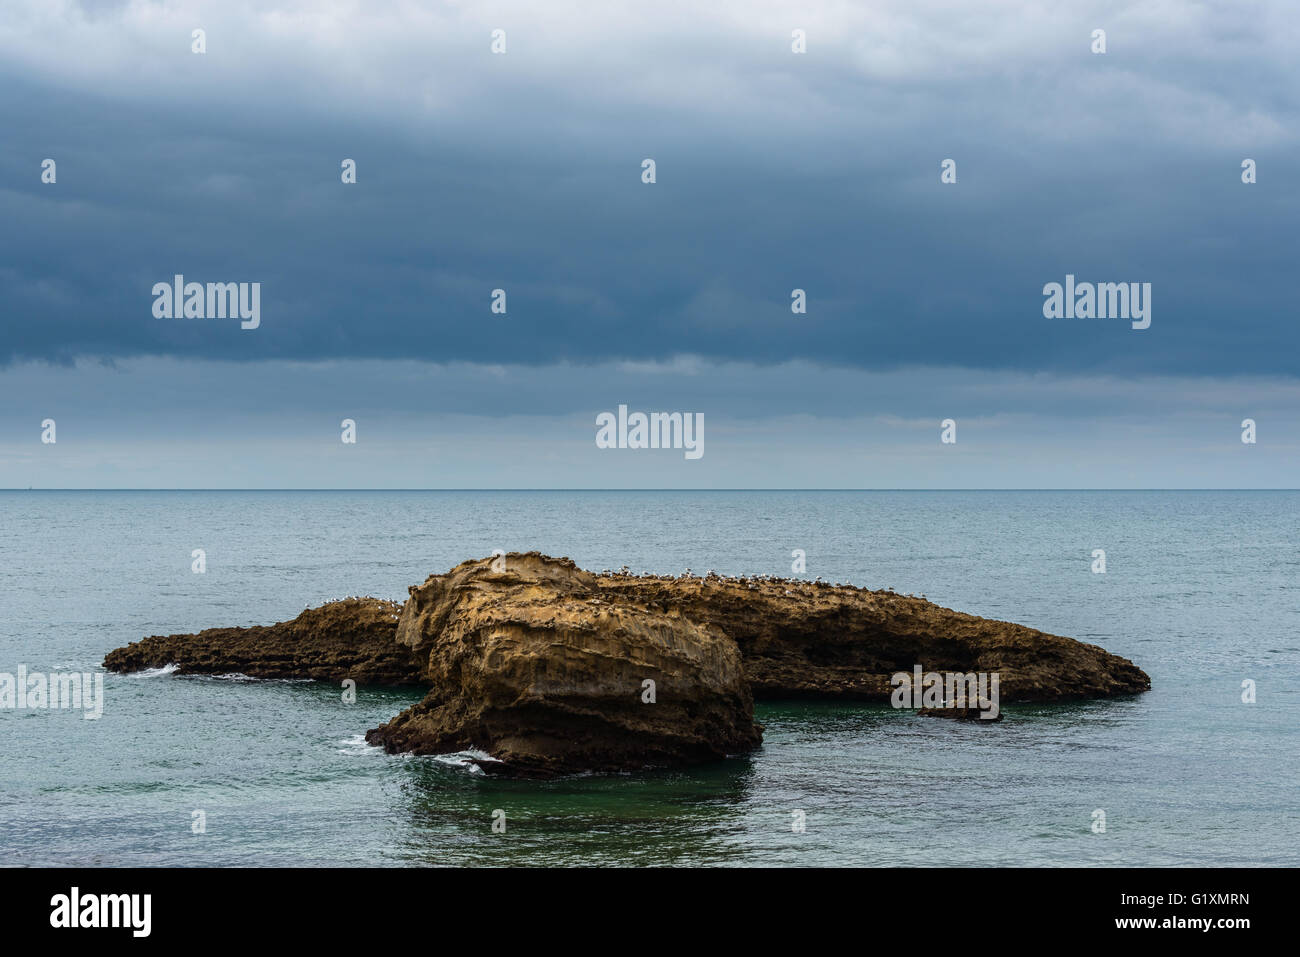 Seaguls on a rock, sea landscape stormy weather Stock Photo